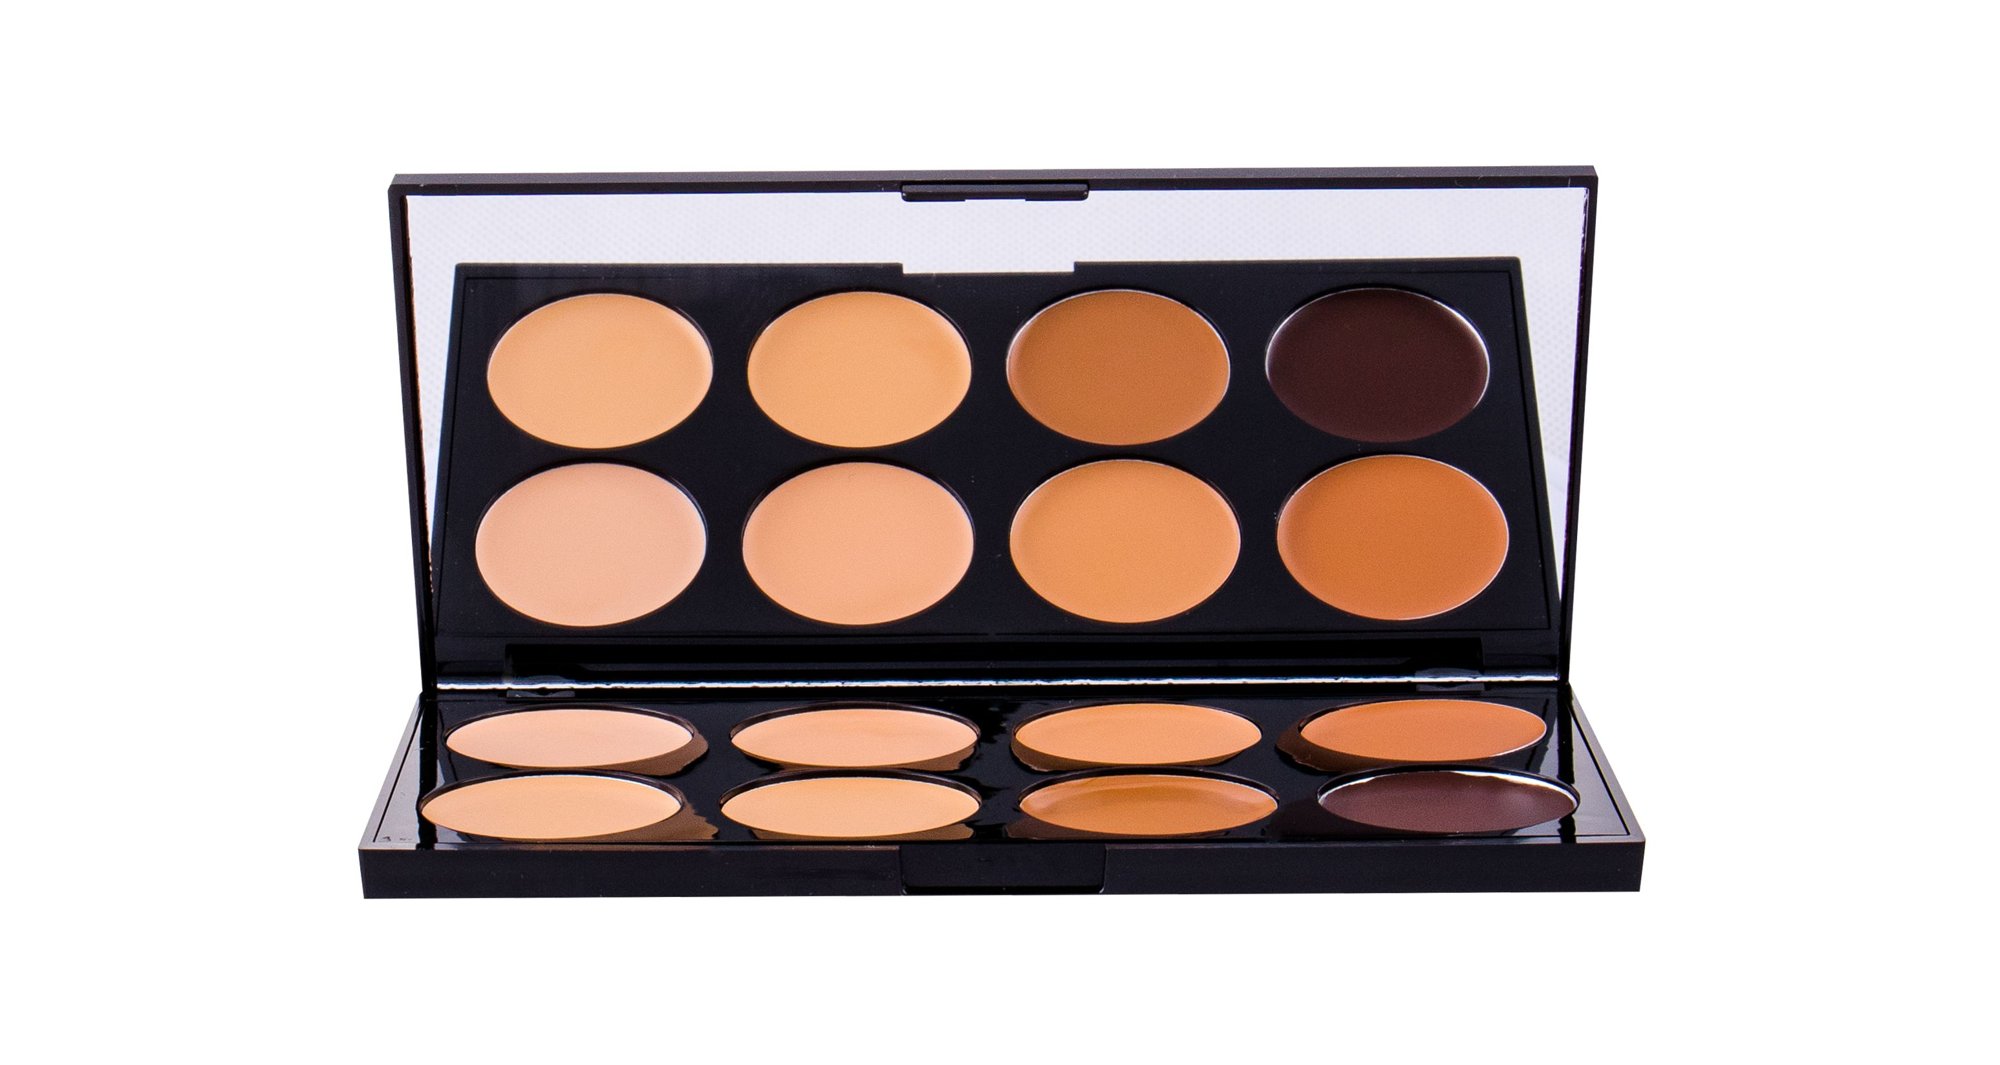 Makeup Revolution London Ultra Cover And Conceal Palette 10g korektorius